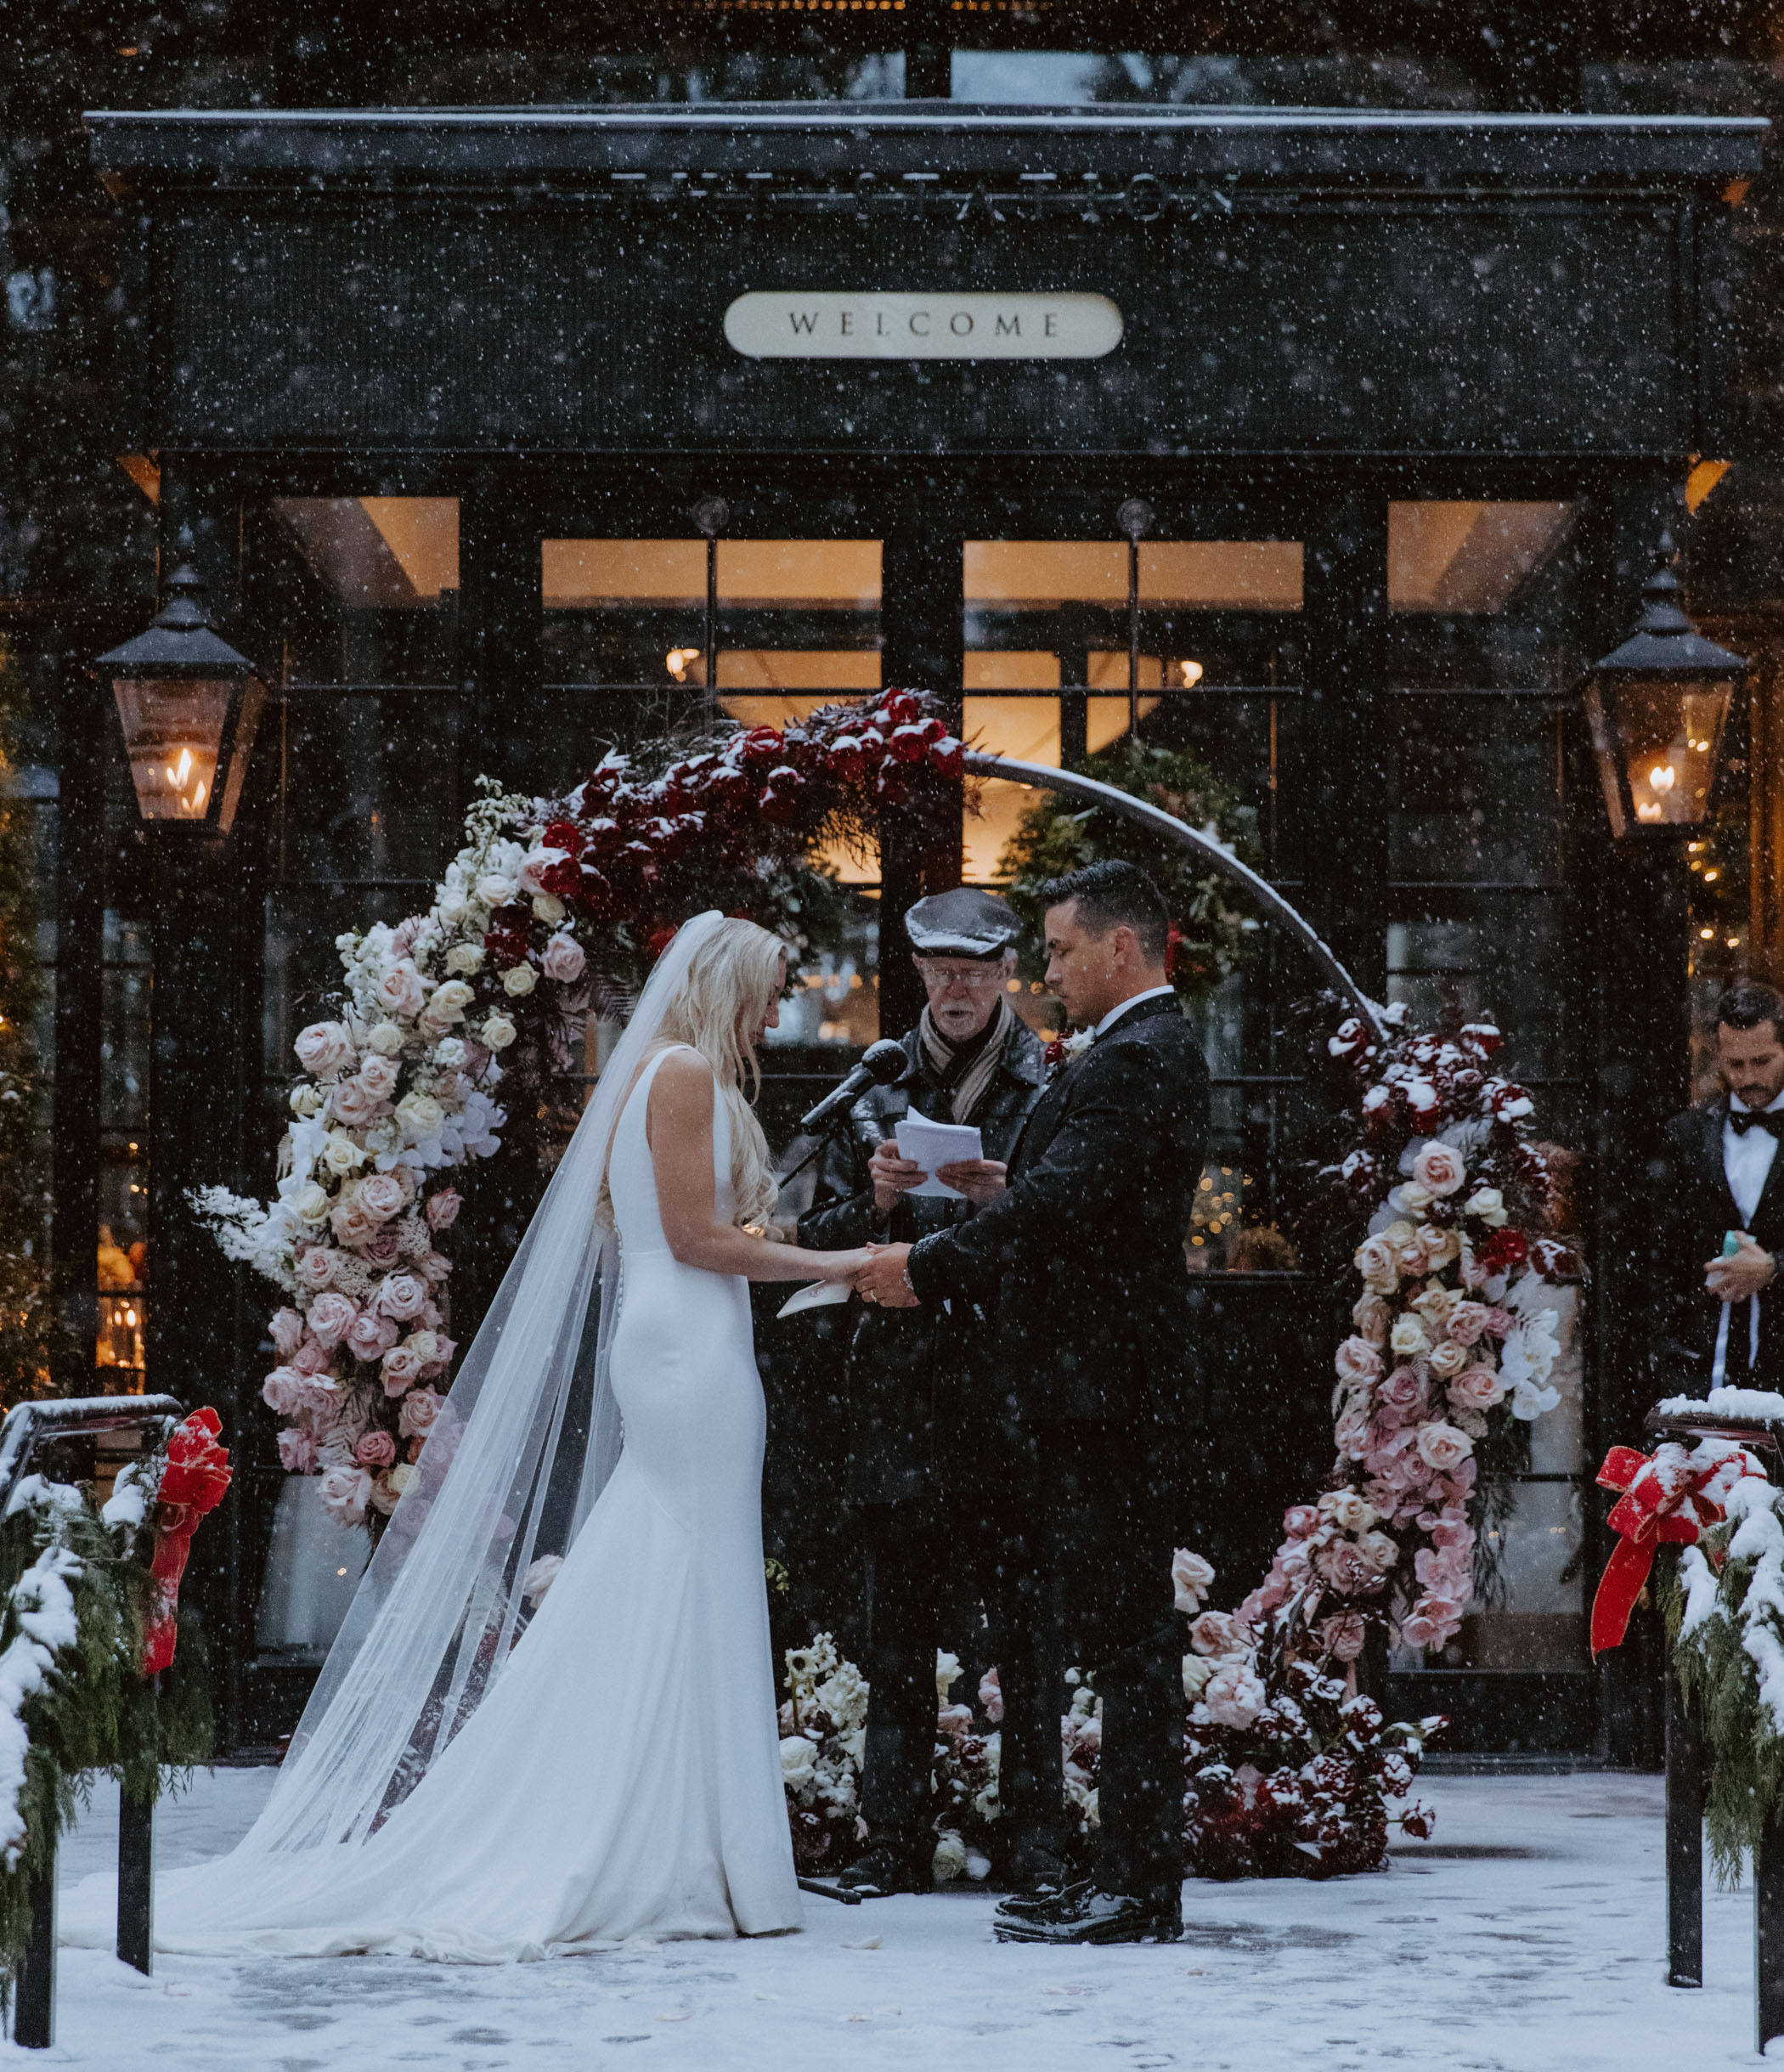 Bride and groom saying vows in the snow